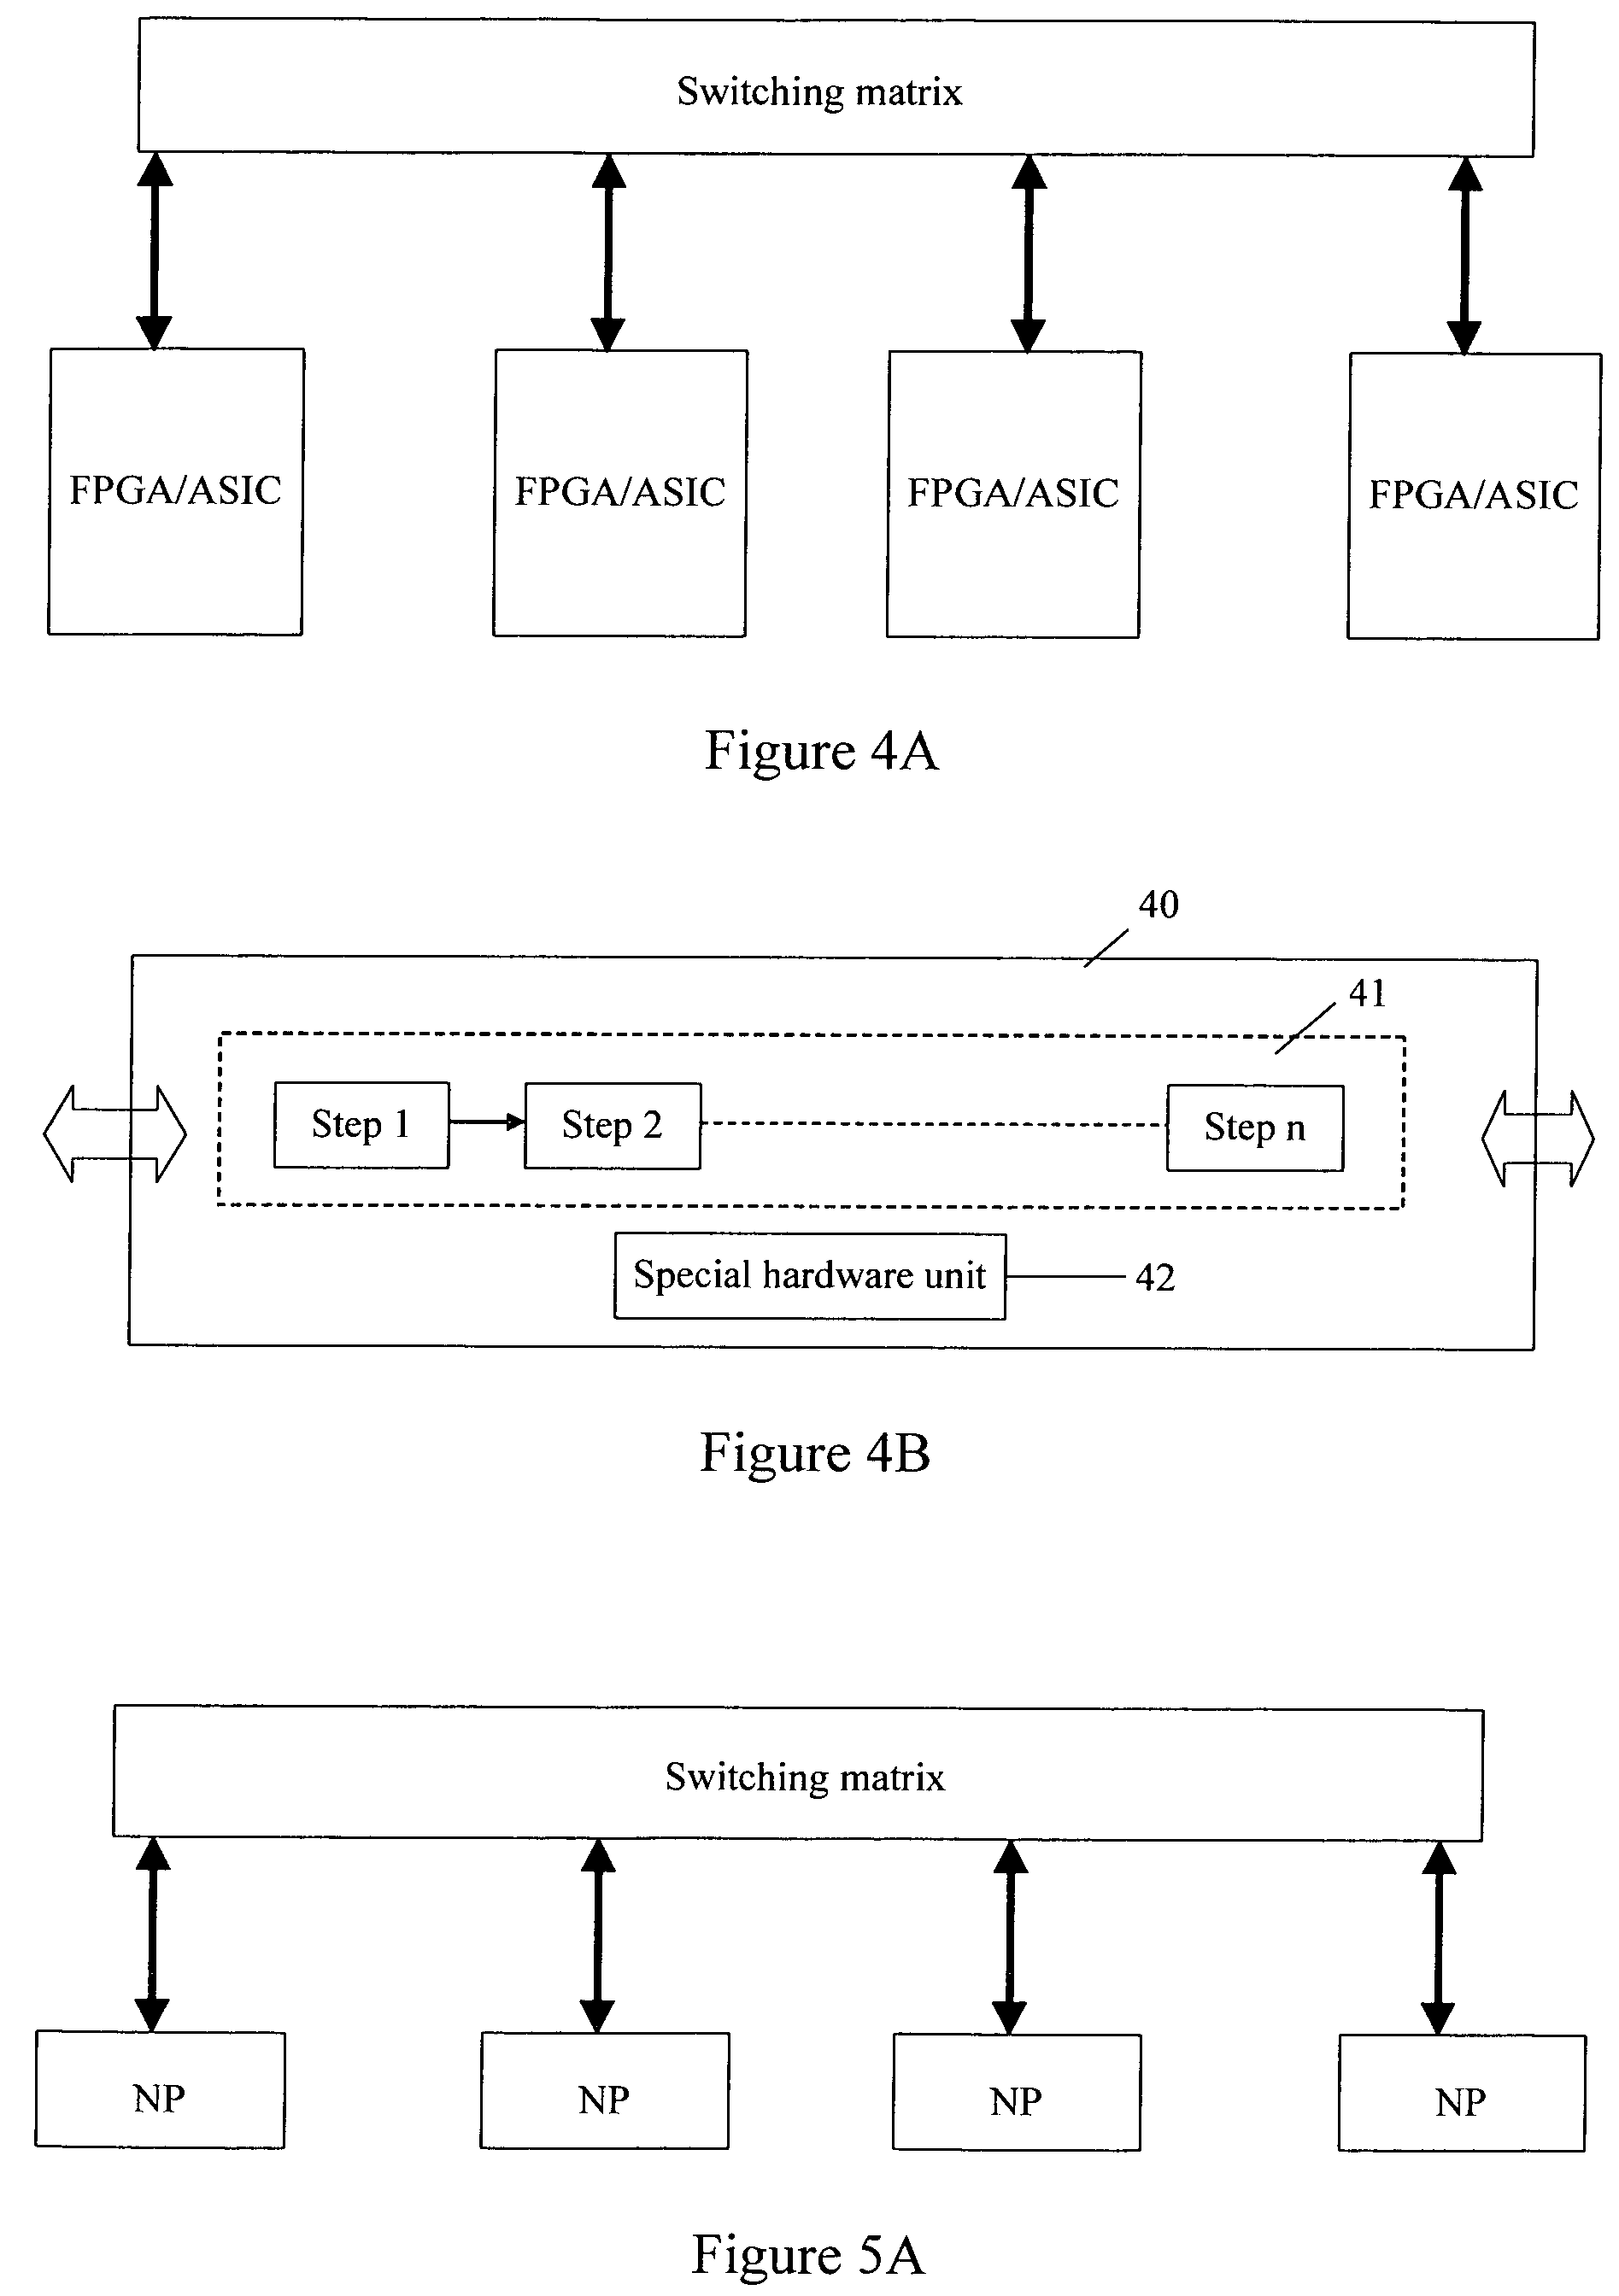 Network processor for forwarding packets in an IP network